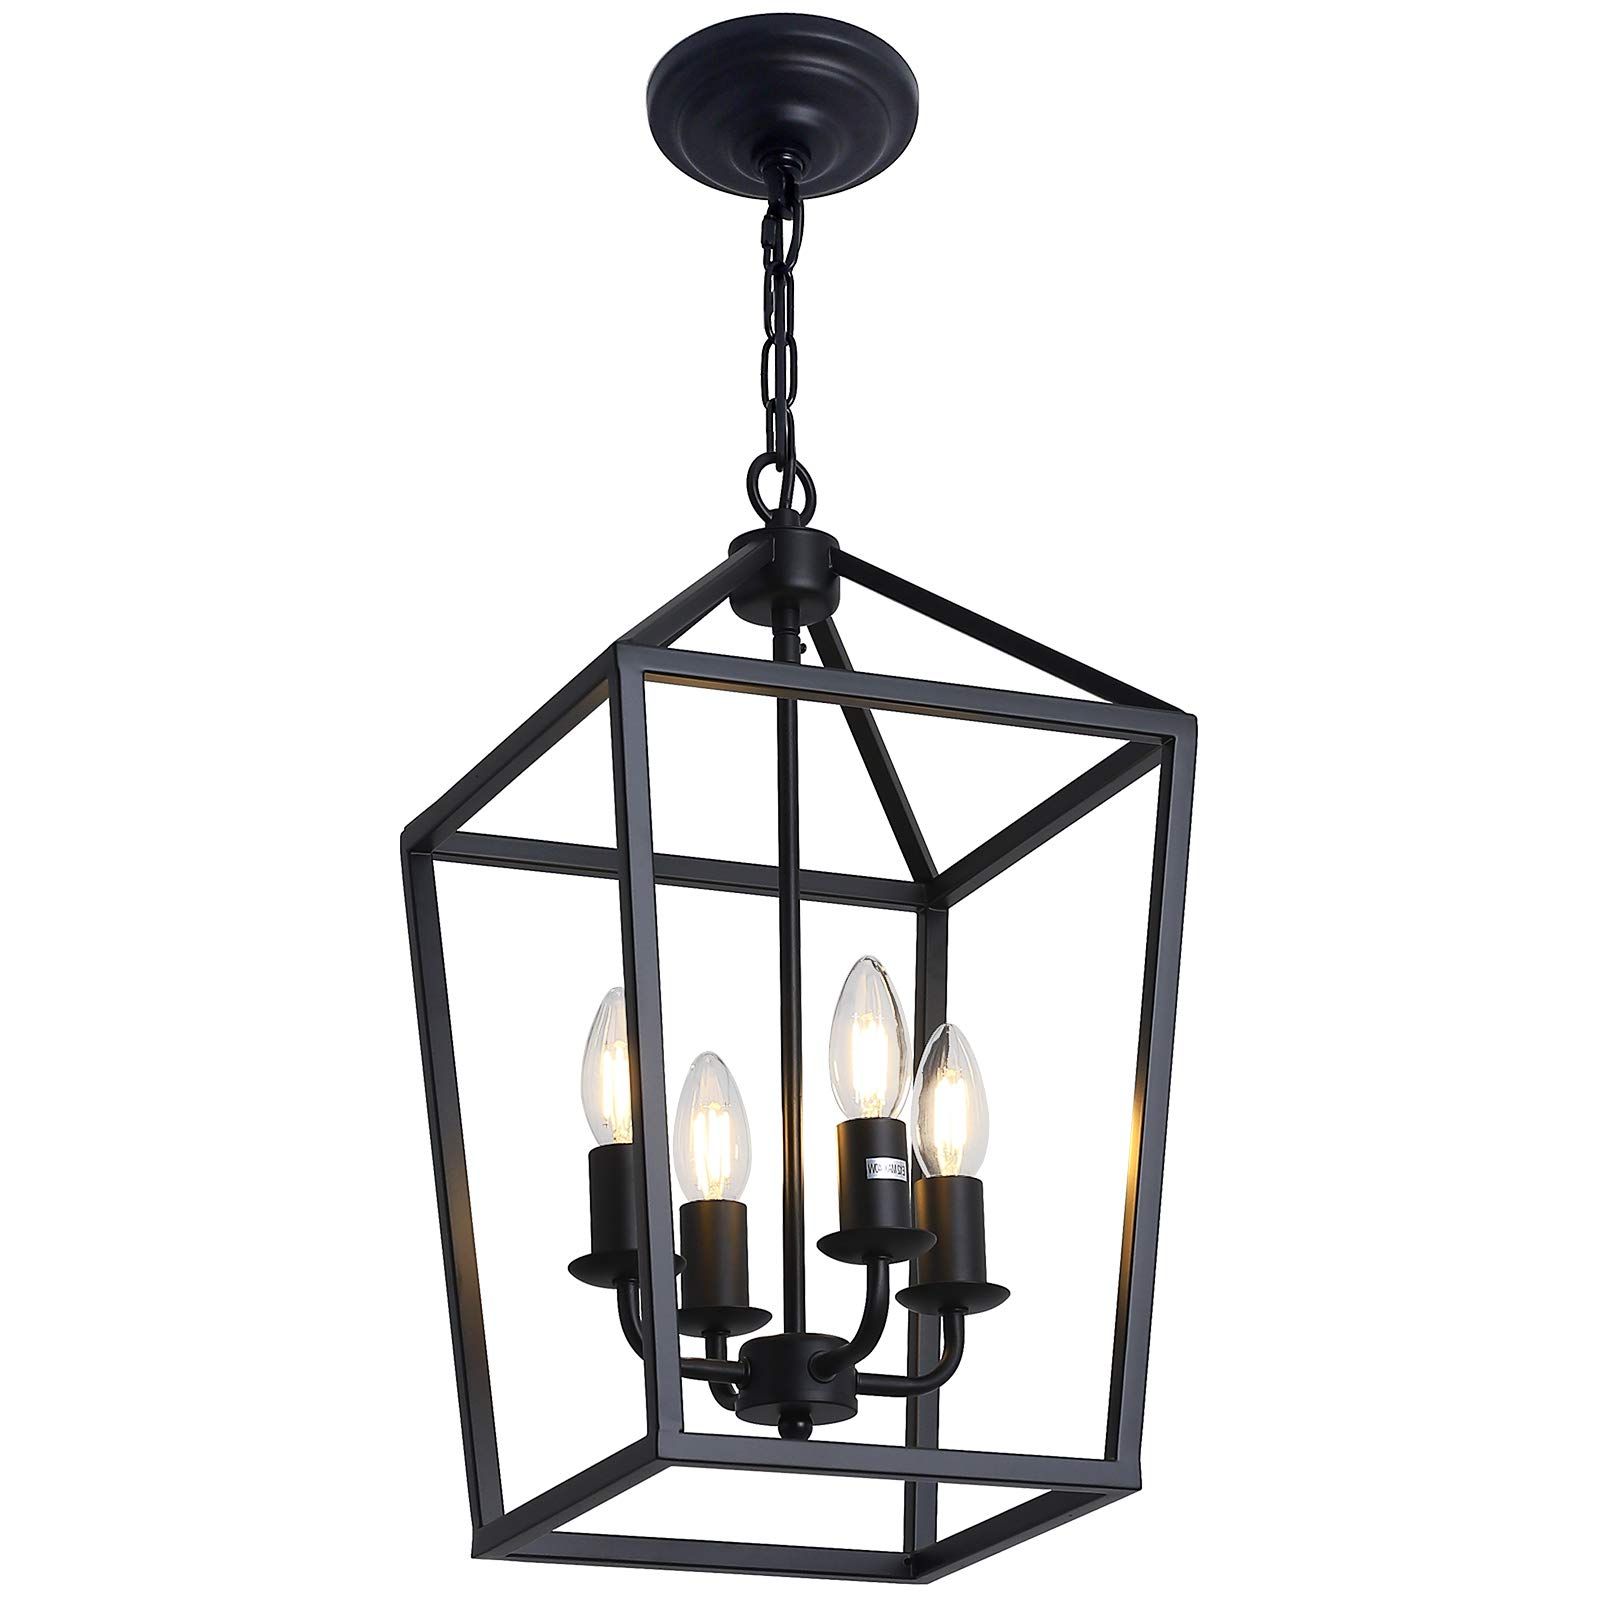 4 Light Black Farmhouse Chandelier Iron Lantern Pendant Light Rustic Cage  Hanging Light Fixtures Industrial Foyer Lights For Kitchen Island Dining  Room Hallway Foyer Entryway – – Amazon With Regard To Most Recent Rustic Black Lantern Chandeliers (View 5 of 15)